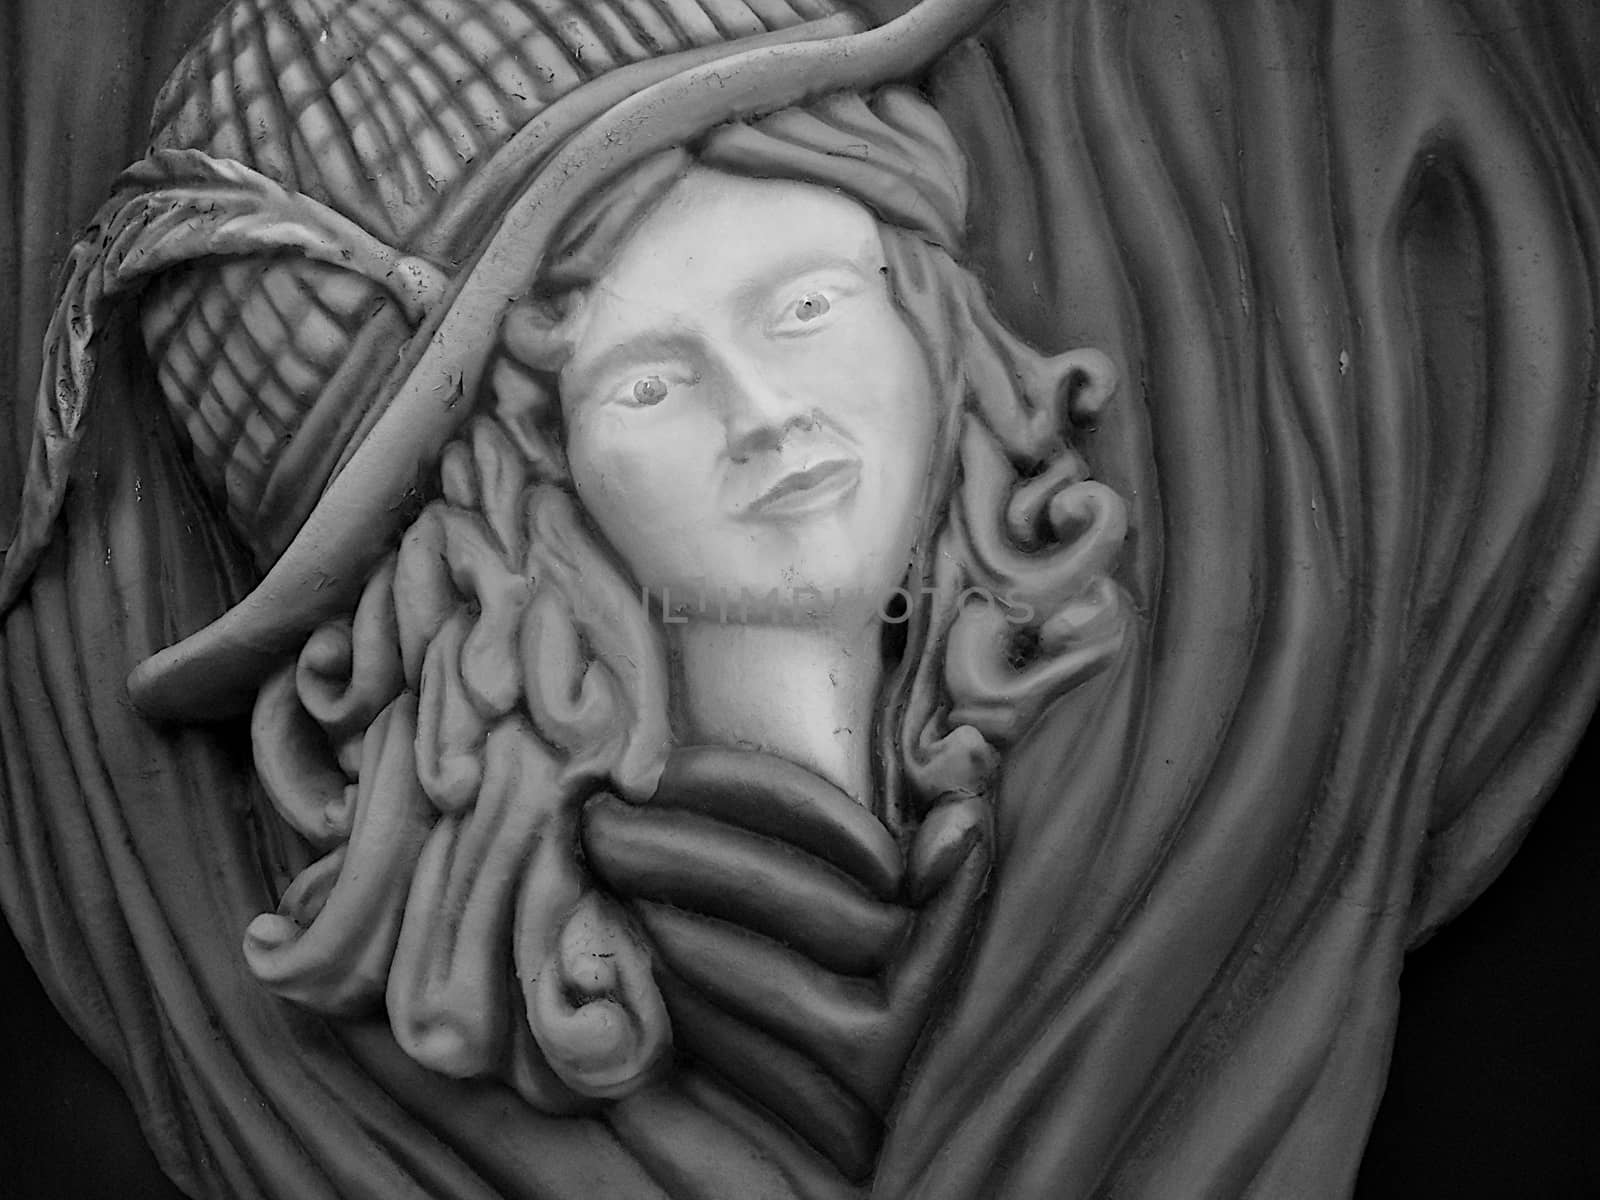 Decorated in black and white of a bar with the face of a woman with long hair